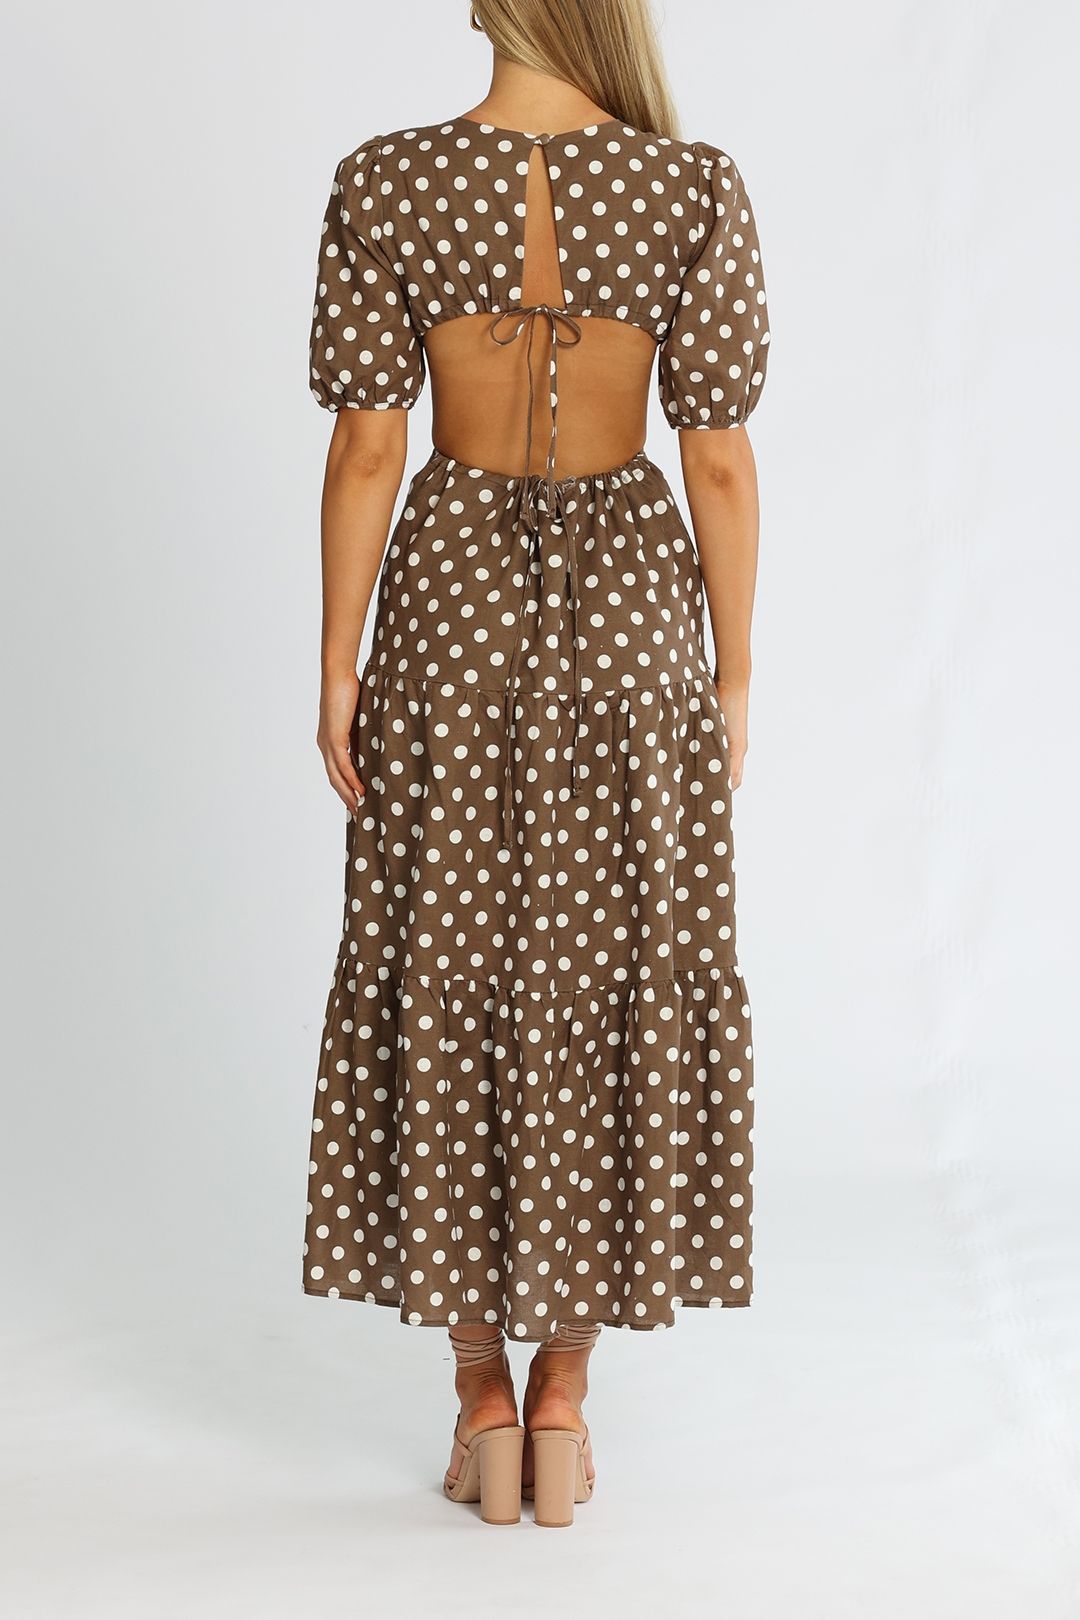 Charlie Holiday The Flores Midi Dress Brown Spot Backless